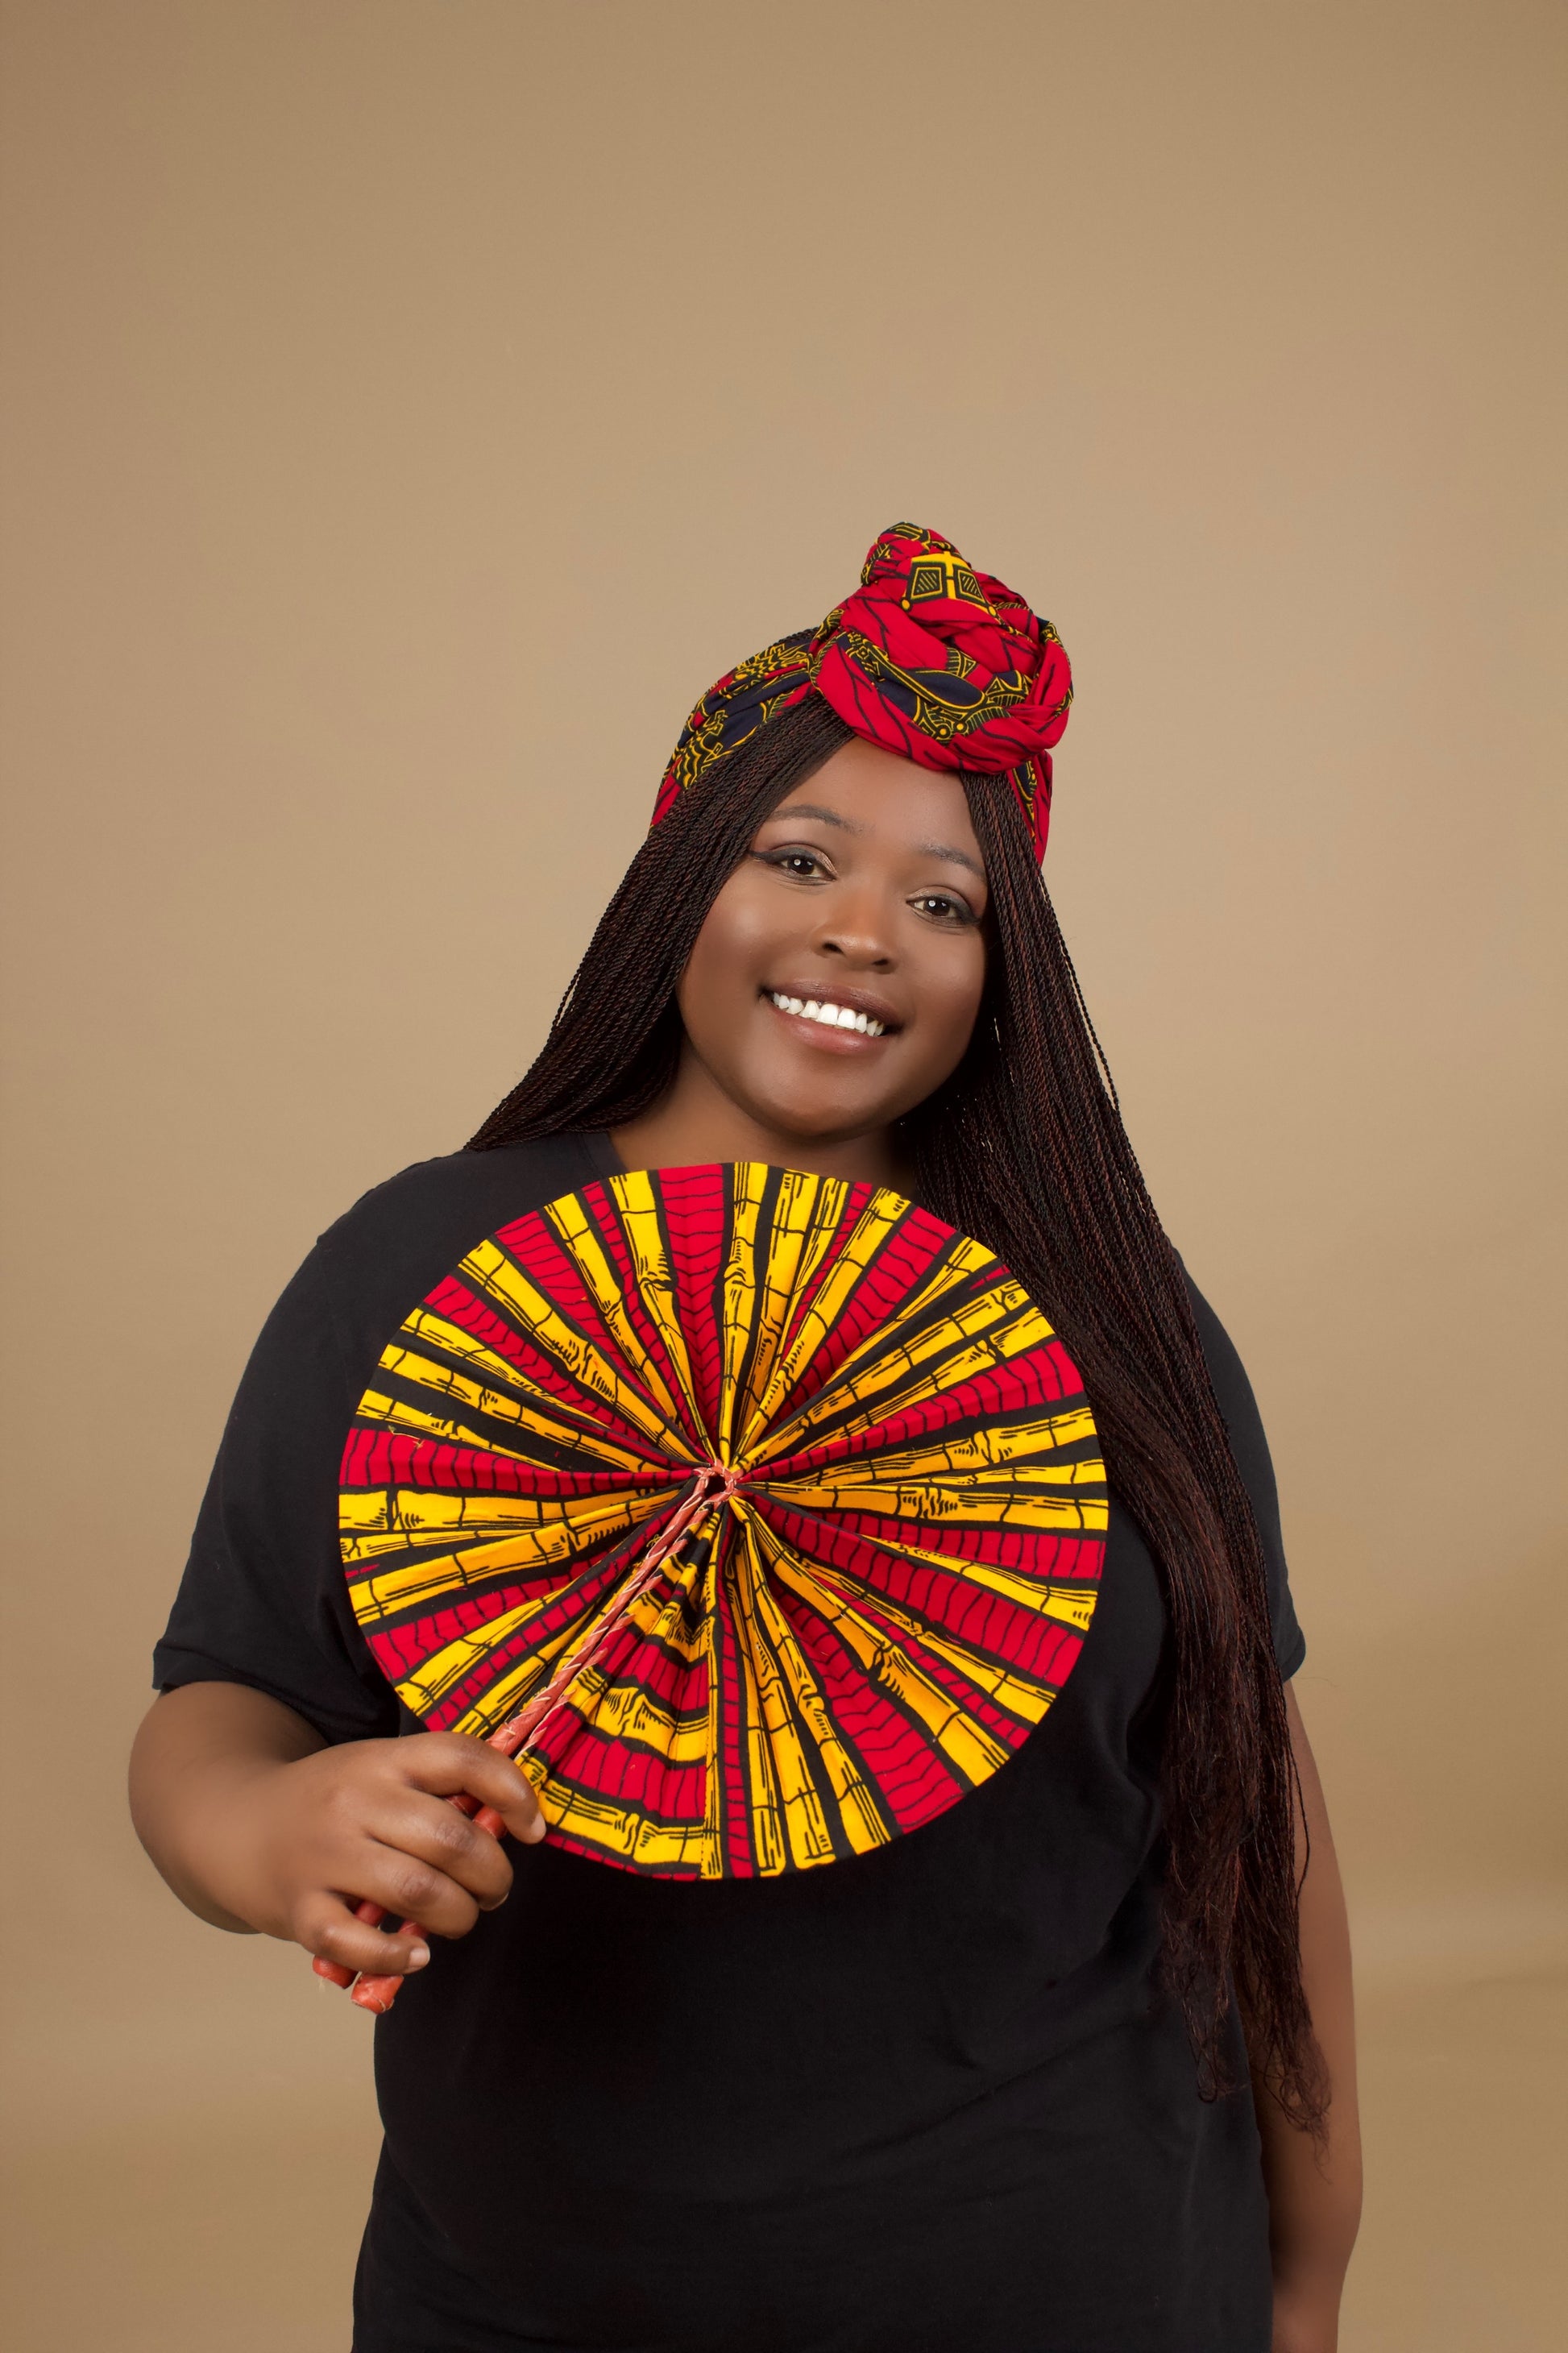 The expandable one-sized Keji i is African Print Reversible Fan is made from sustainably sourced 100% cotton Ankara wax print . It features a bold multi-colored bamboo tribal print in red, yellow and black  pattern and a Leather Handle and fastener. Designed and Made in Ghana.